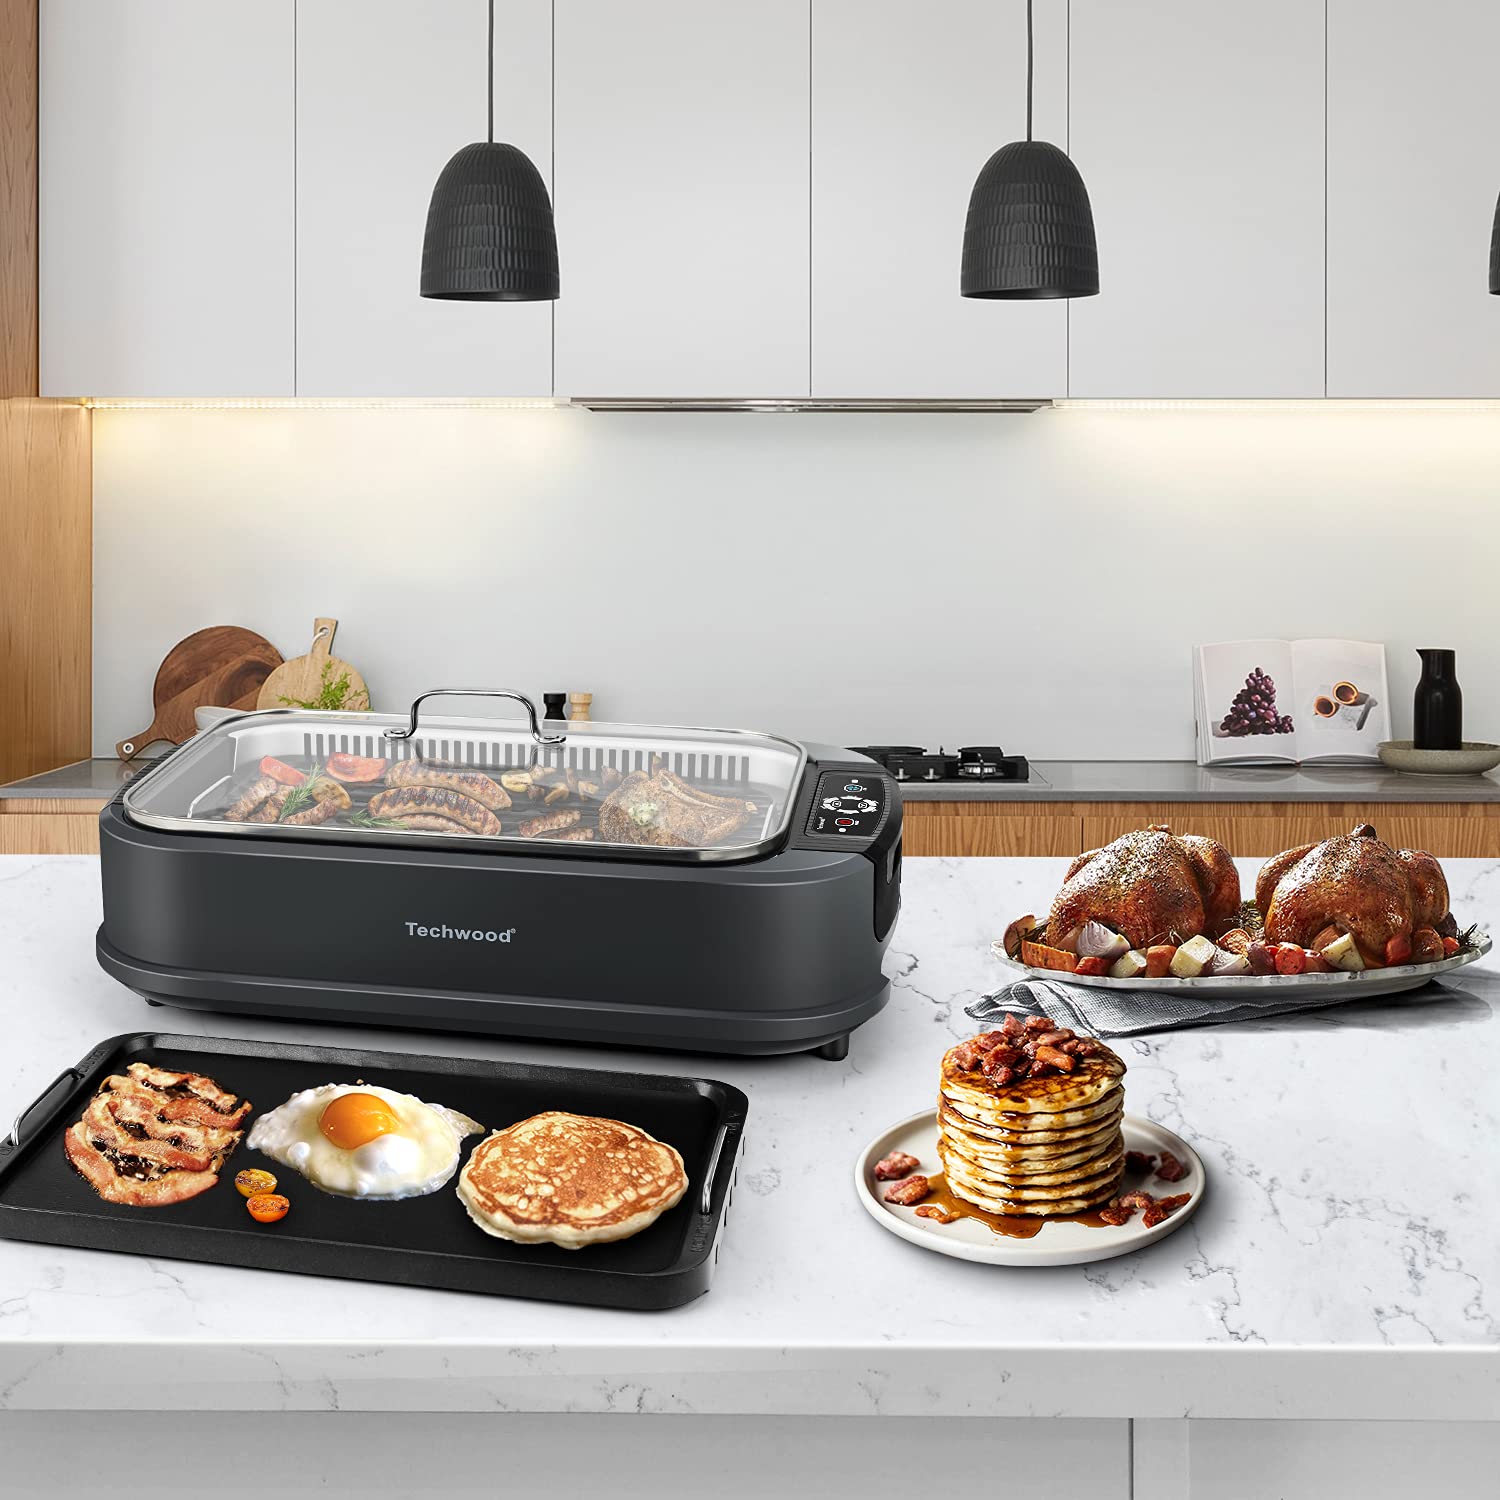 PowerXL Smokeless Indoor Electric 1500W Grill w/ Griddle Plate 